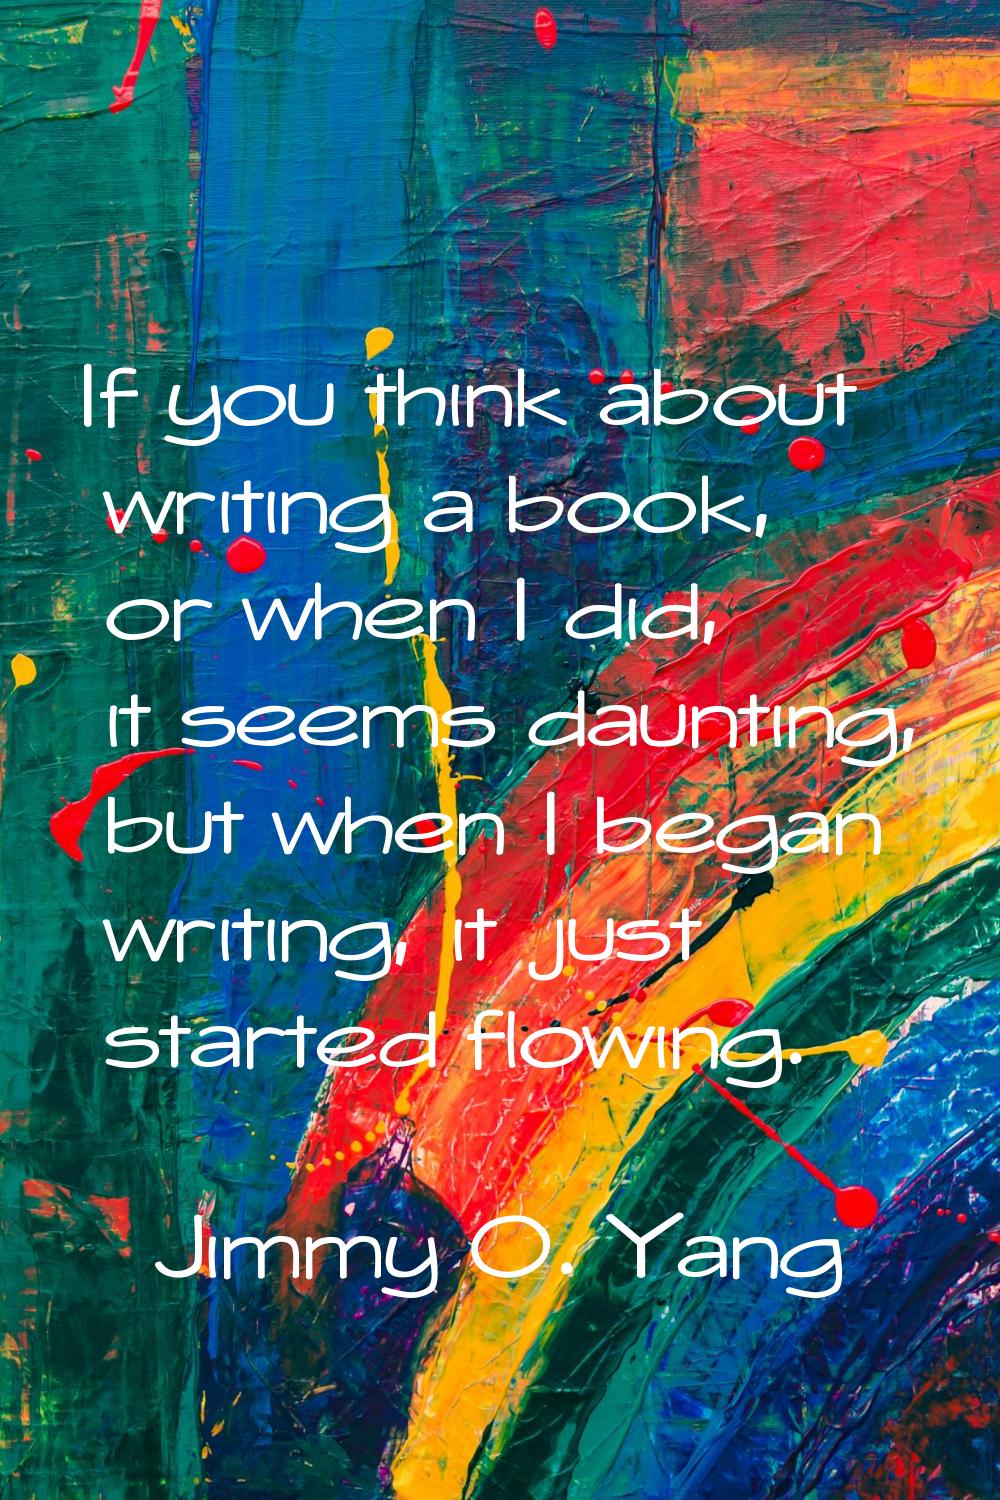 If you think about writing a book, or when I did, it seems daunting, but when I began writing, it j